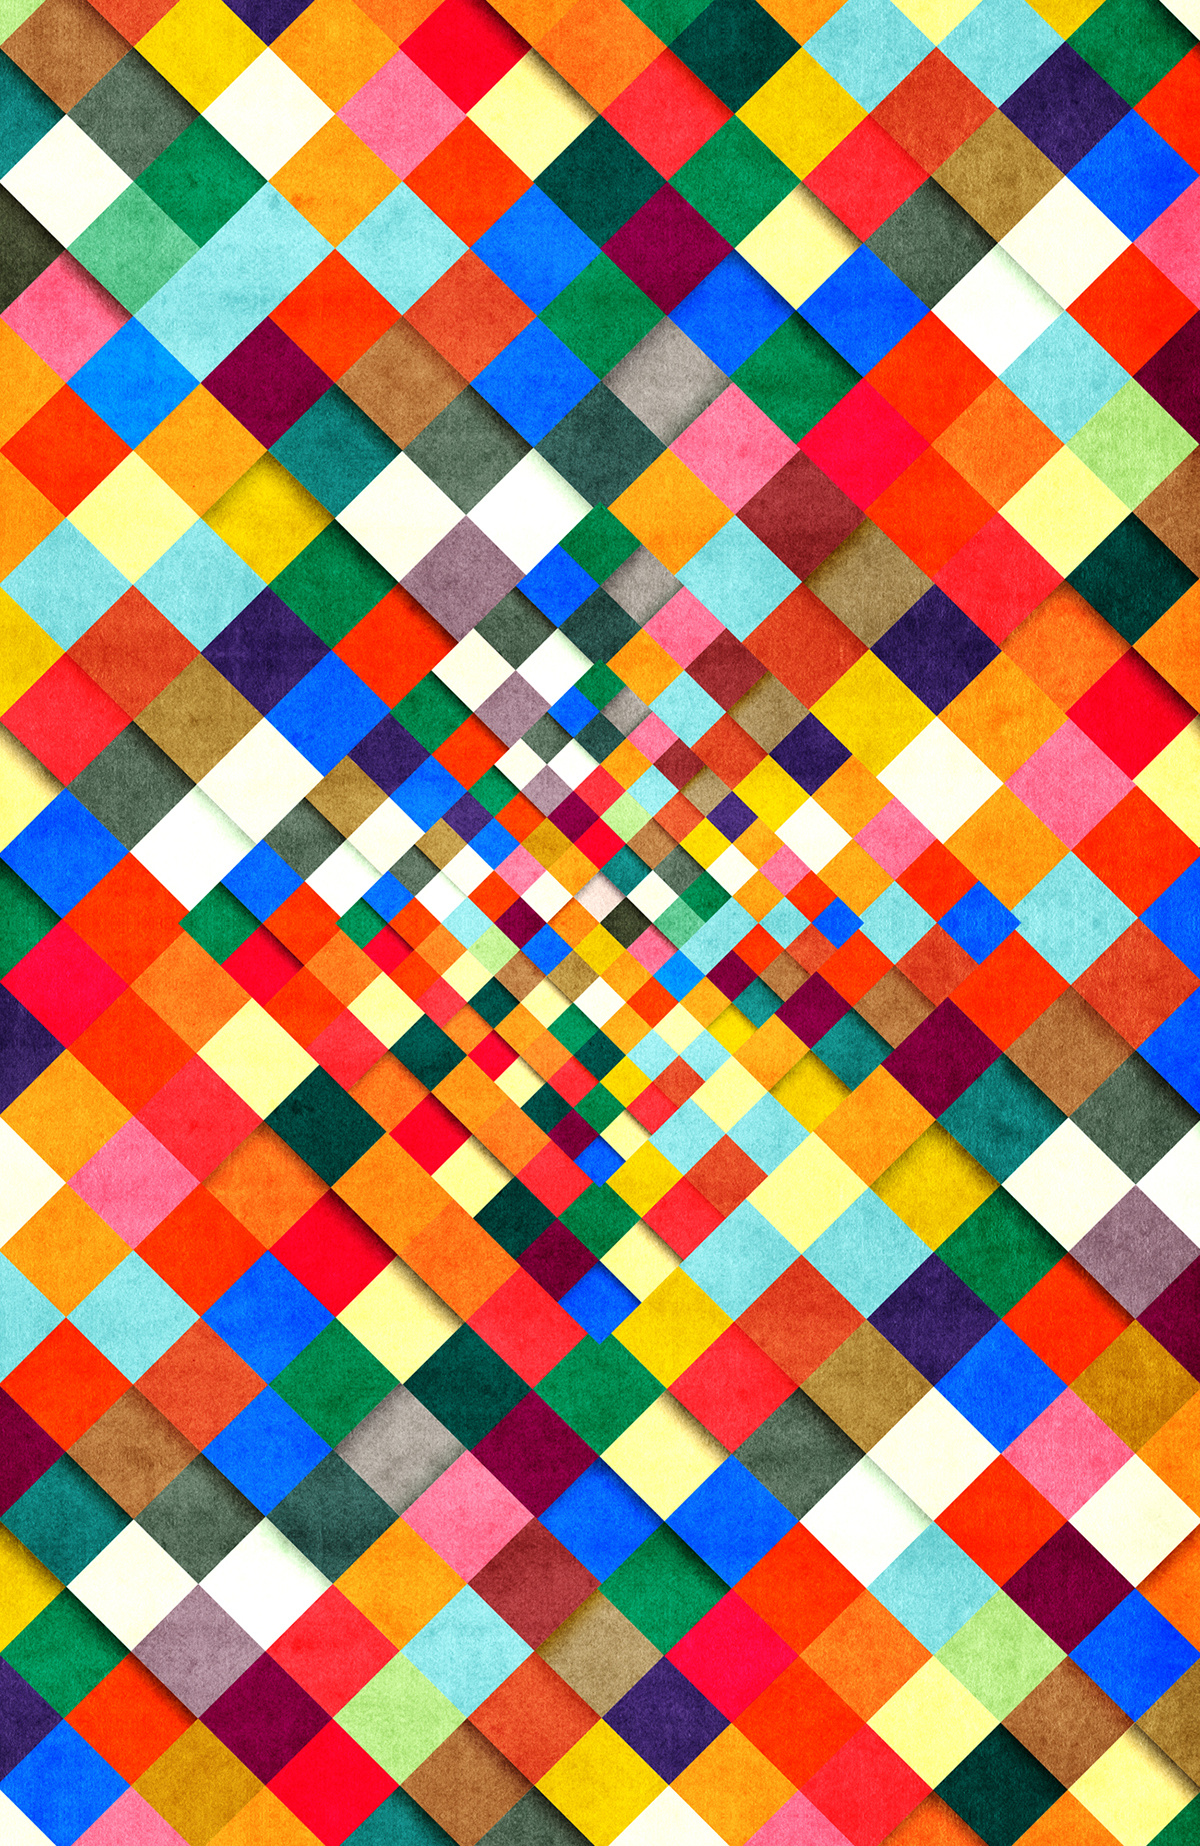 squares shapes Colourful  Fun pattern geometry